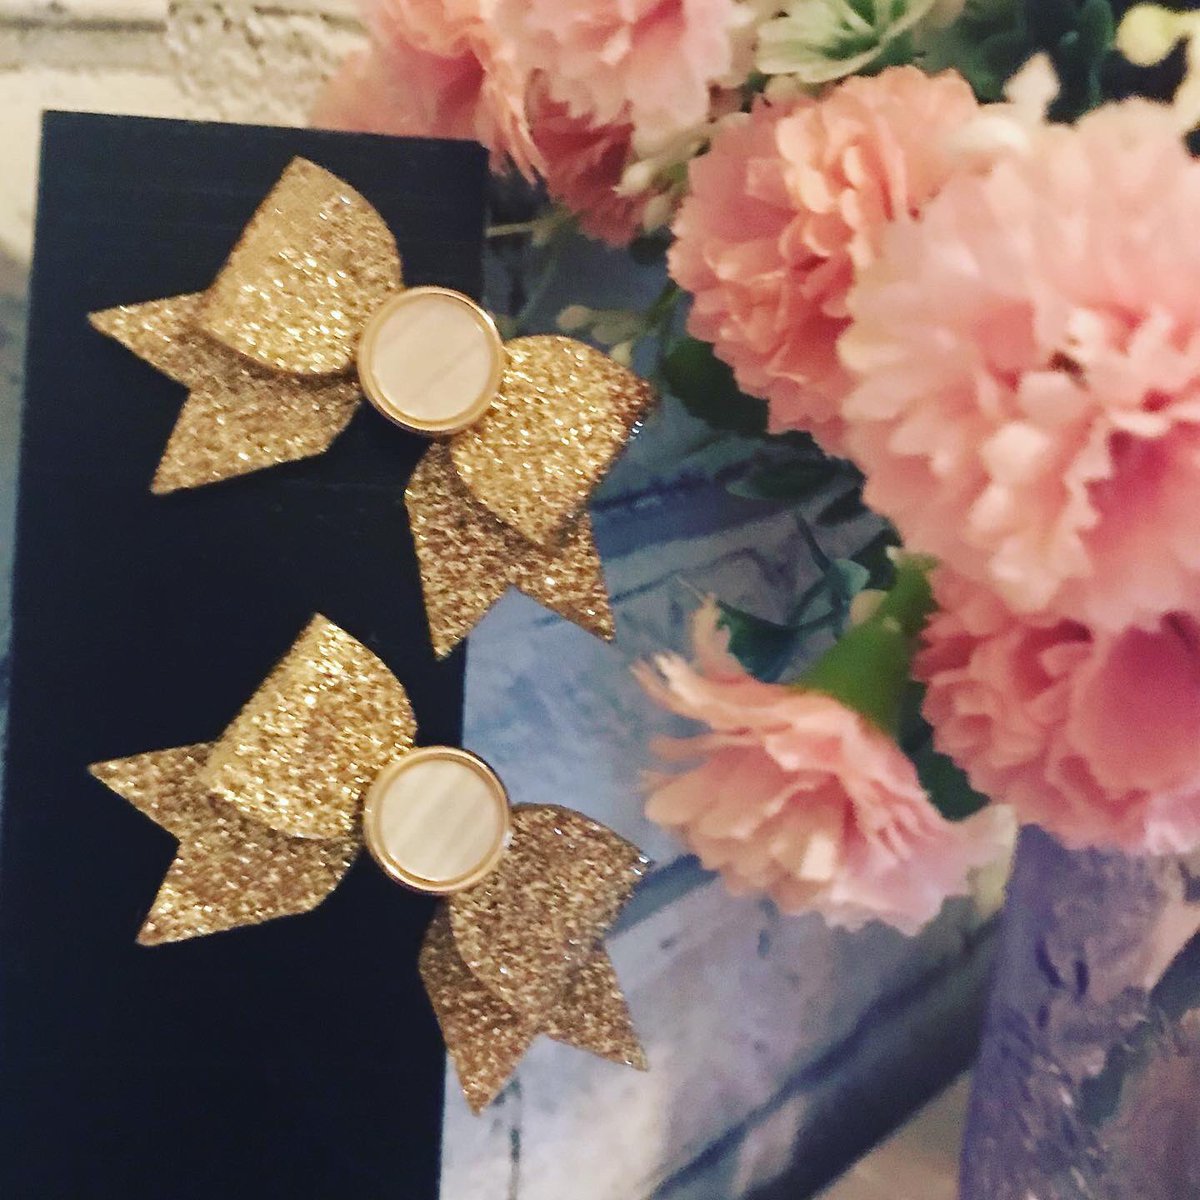 Little gold sparkly beauties 💎
A duo of gold sparkle faux leather studded hair bows

#Etsy #Etsyshop #Etsyseller #Etsyfinds #Etsygifts #Etsylove #Etsyhandmade #Etsymaker #Etsystore #Etsysellersofinstagram #Etsycommunity #hairaccessories #hair #hairstyle #accessories #style